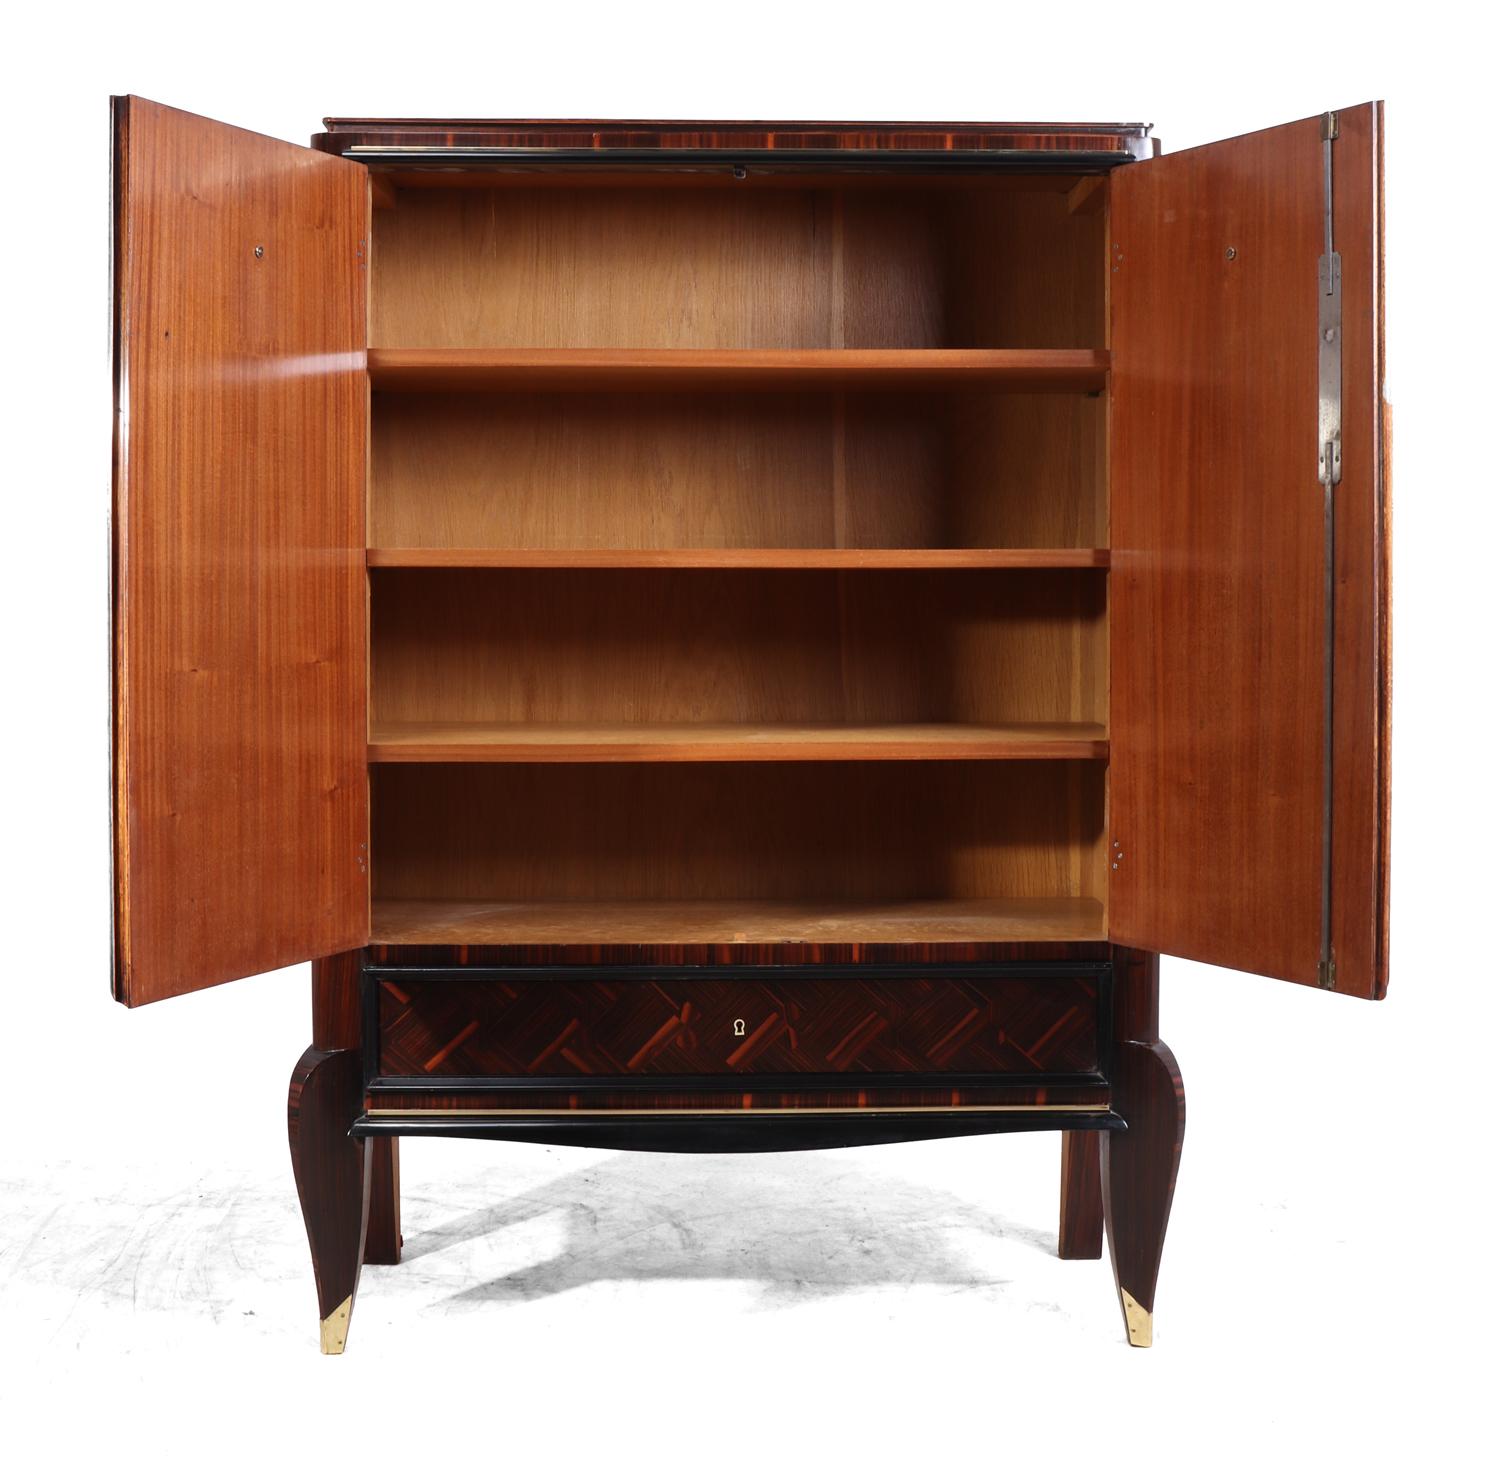 Art Deco Macassar Ebony Cabinet In Excellent Condition For Sale In Paddock Wood, Kent